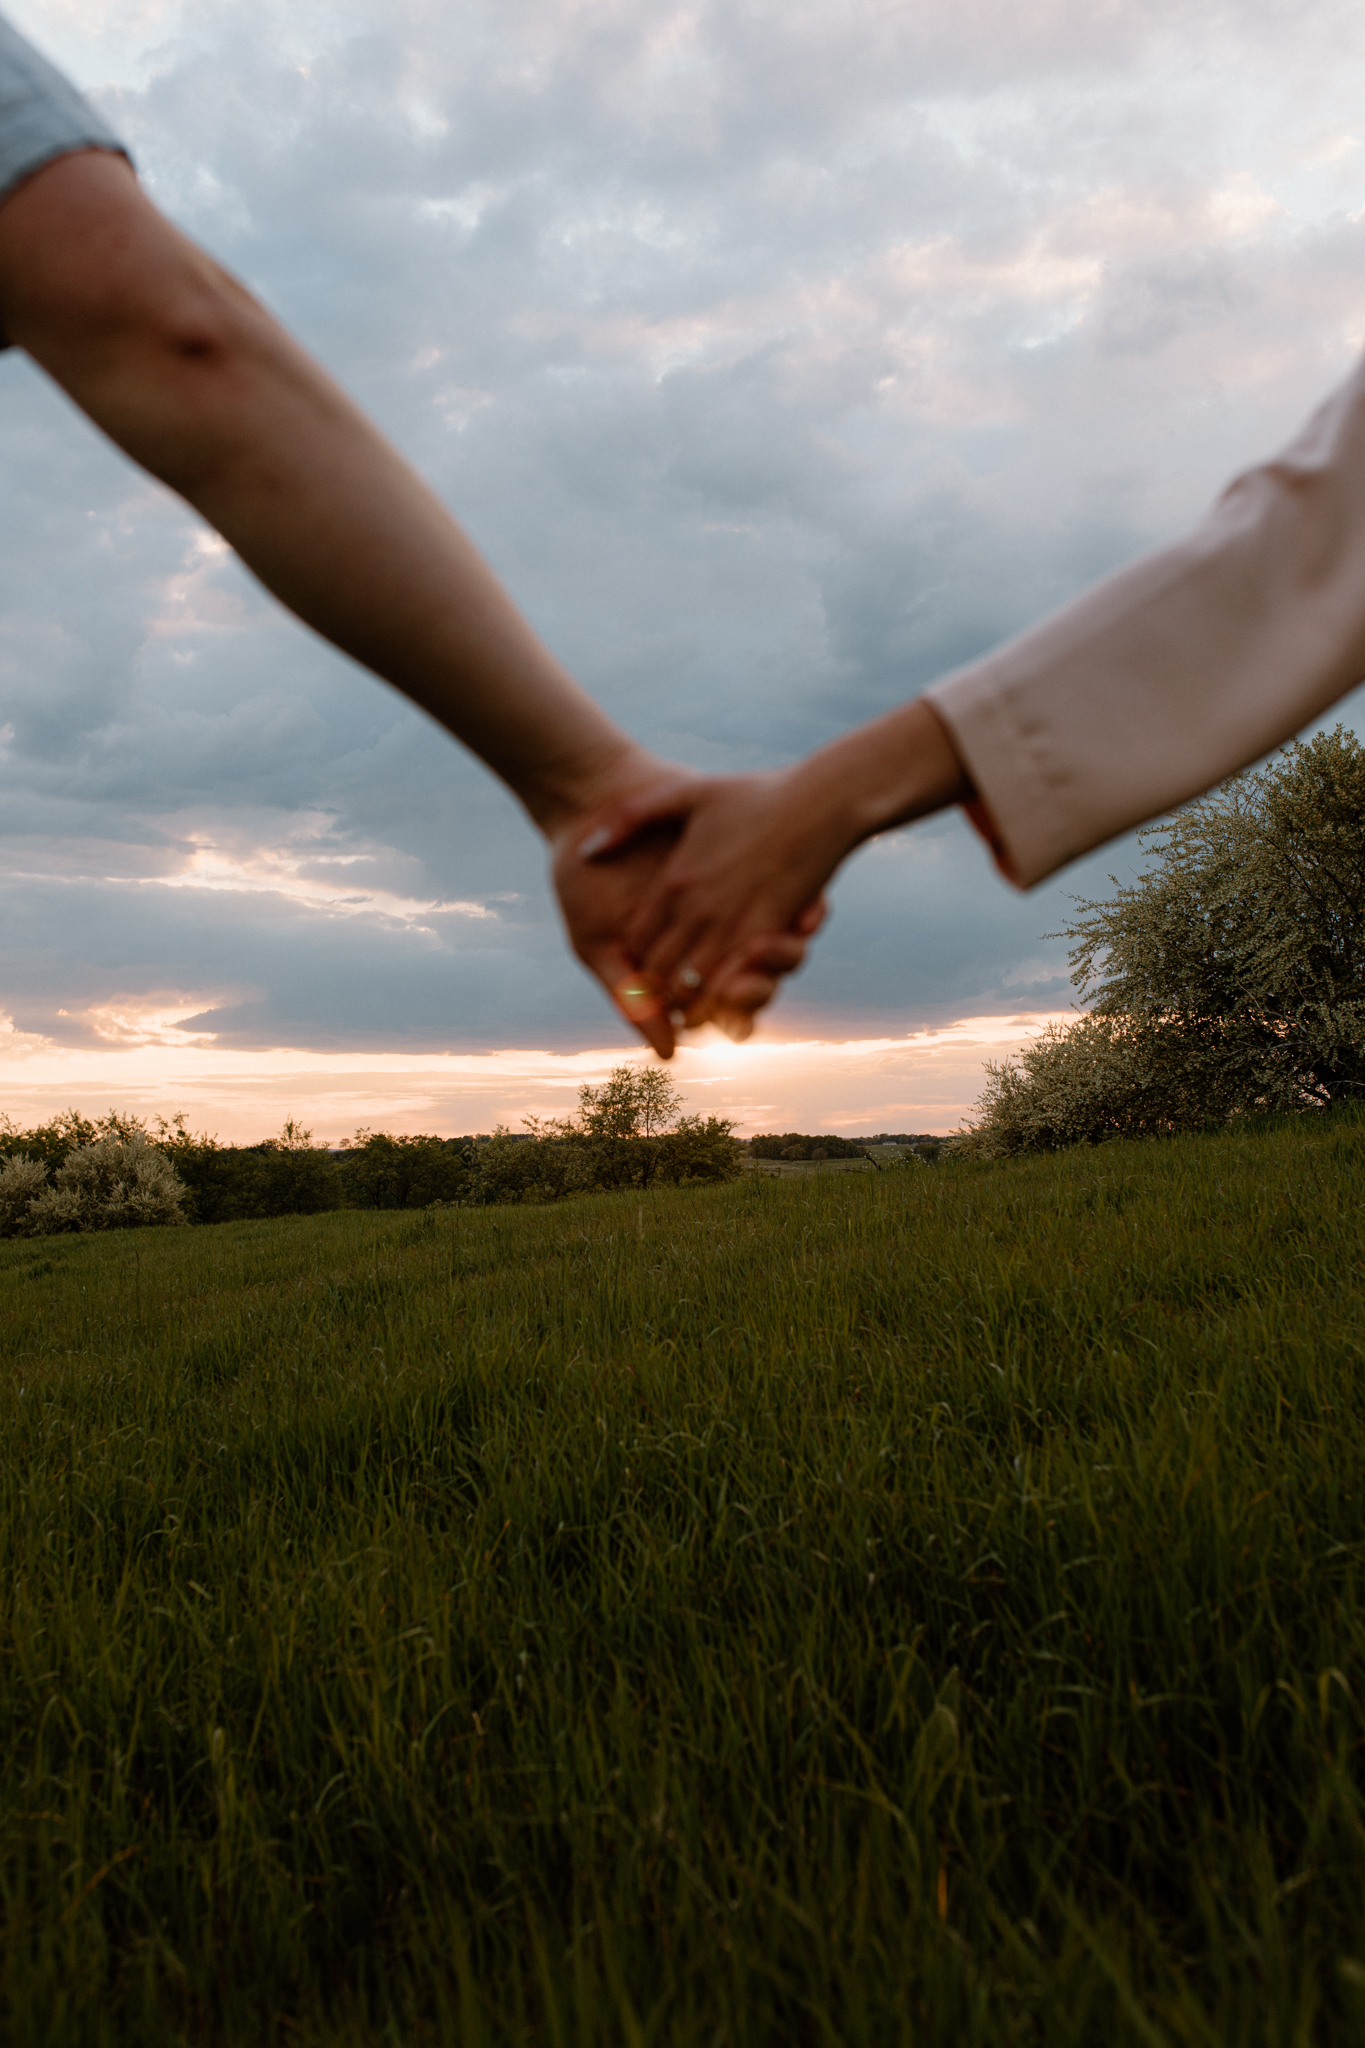 holding hands blurred with sunset in the focus